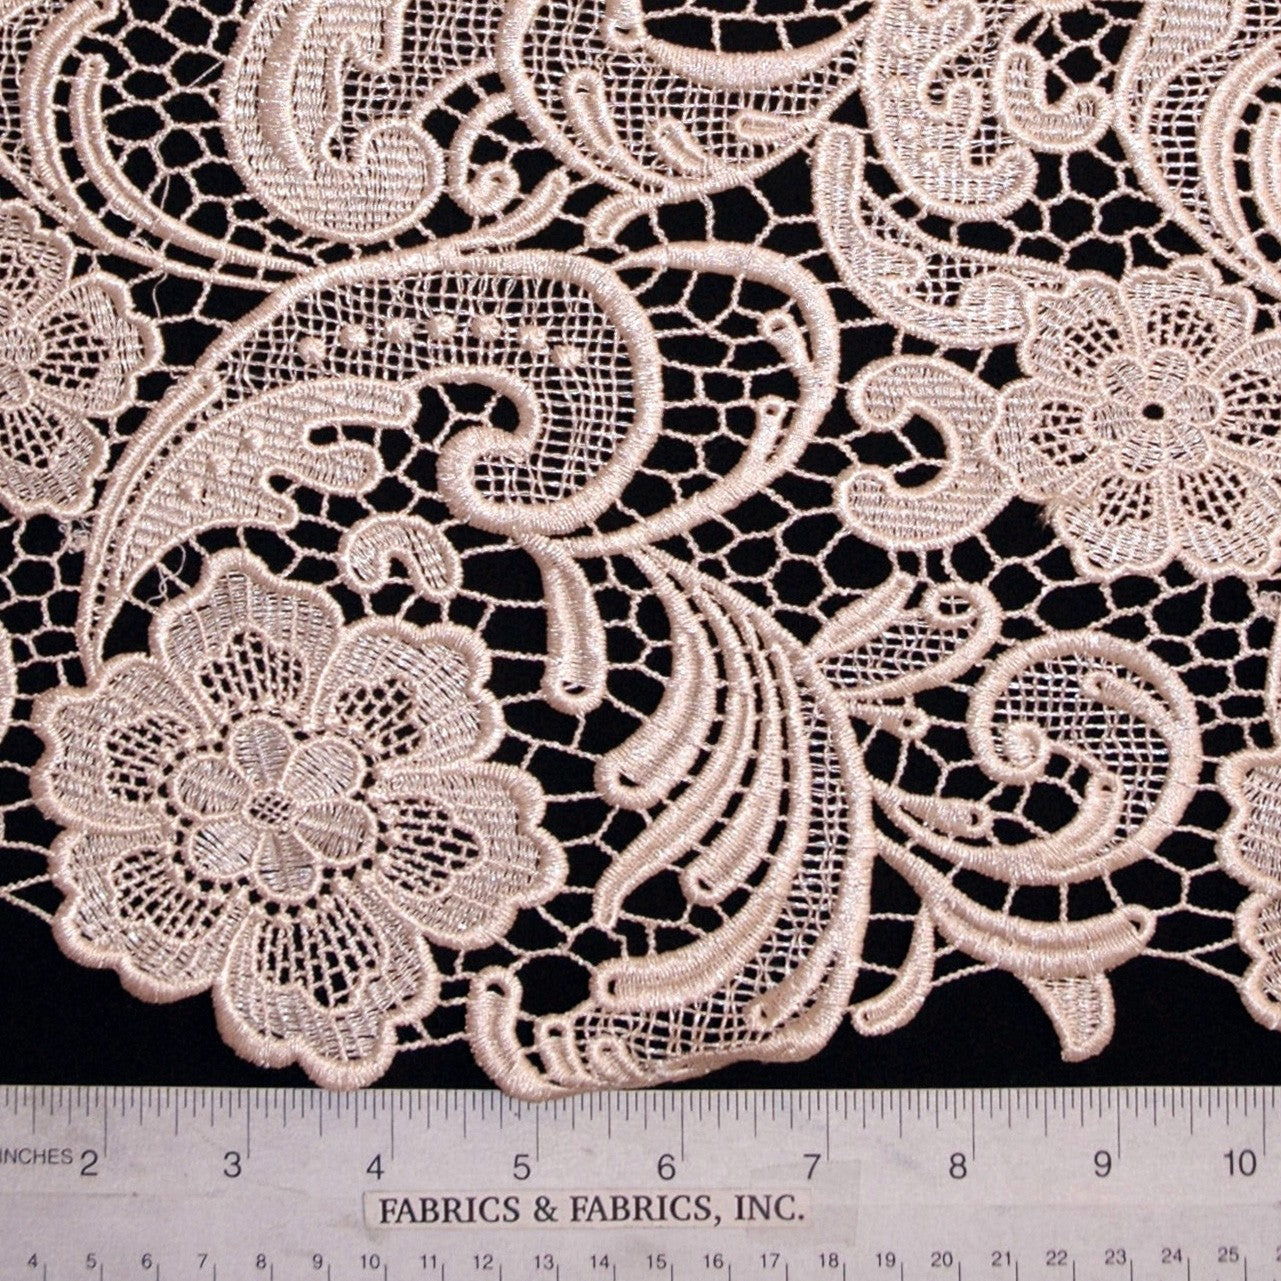 Buy 2 Yards 17 inches Width Beige Cotton Lace Fabric Retro